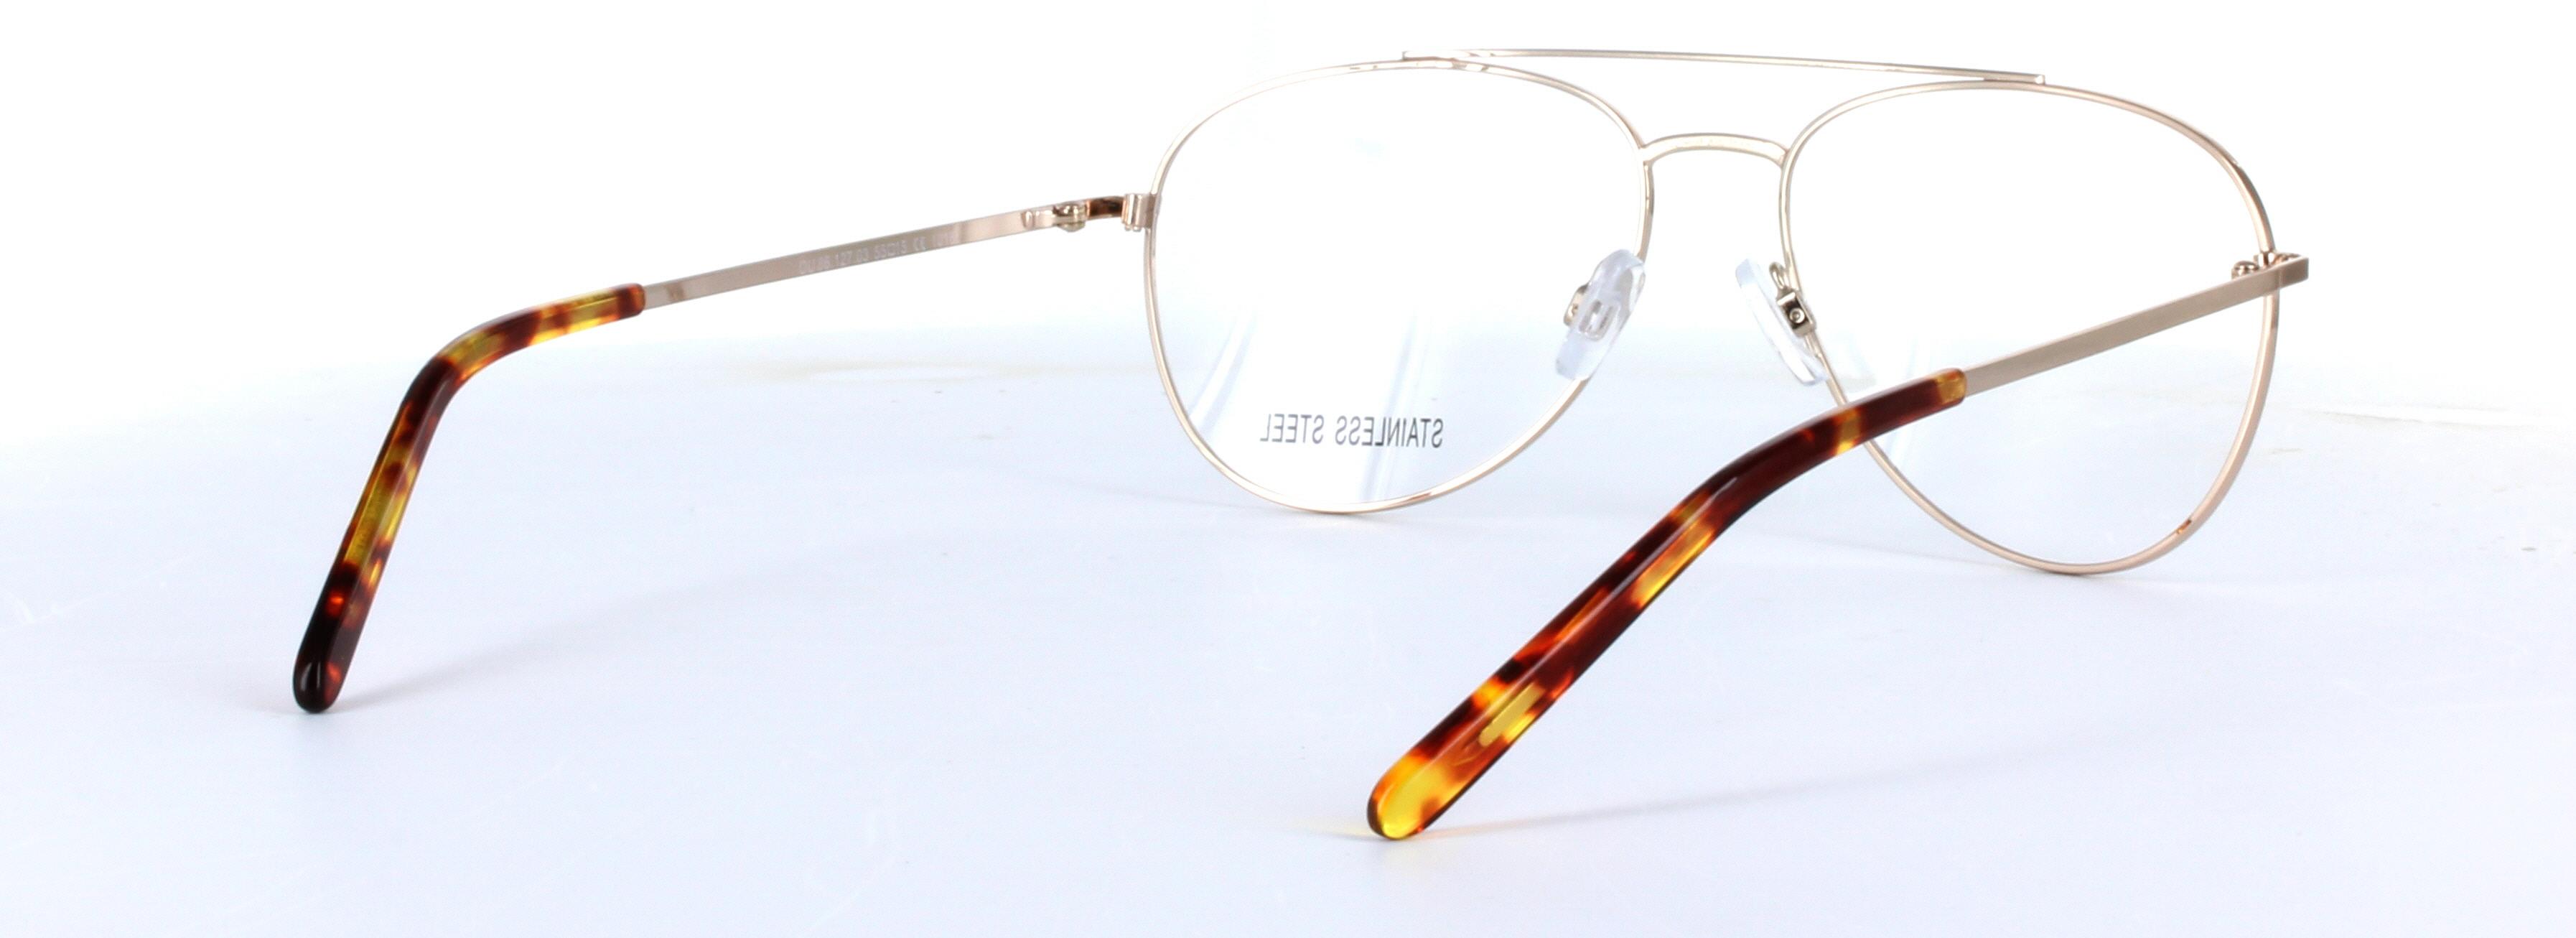 Gianni Gold Full Rim Oval Metal Glasses - Image View 4